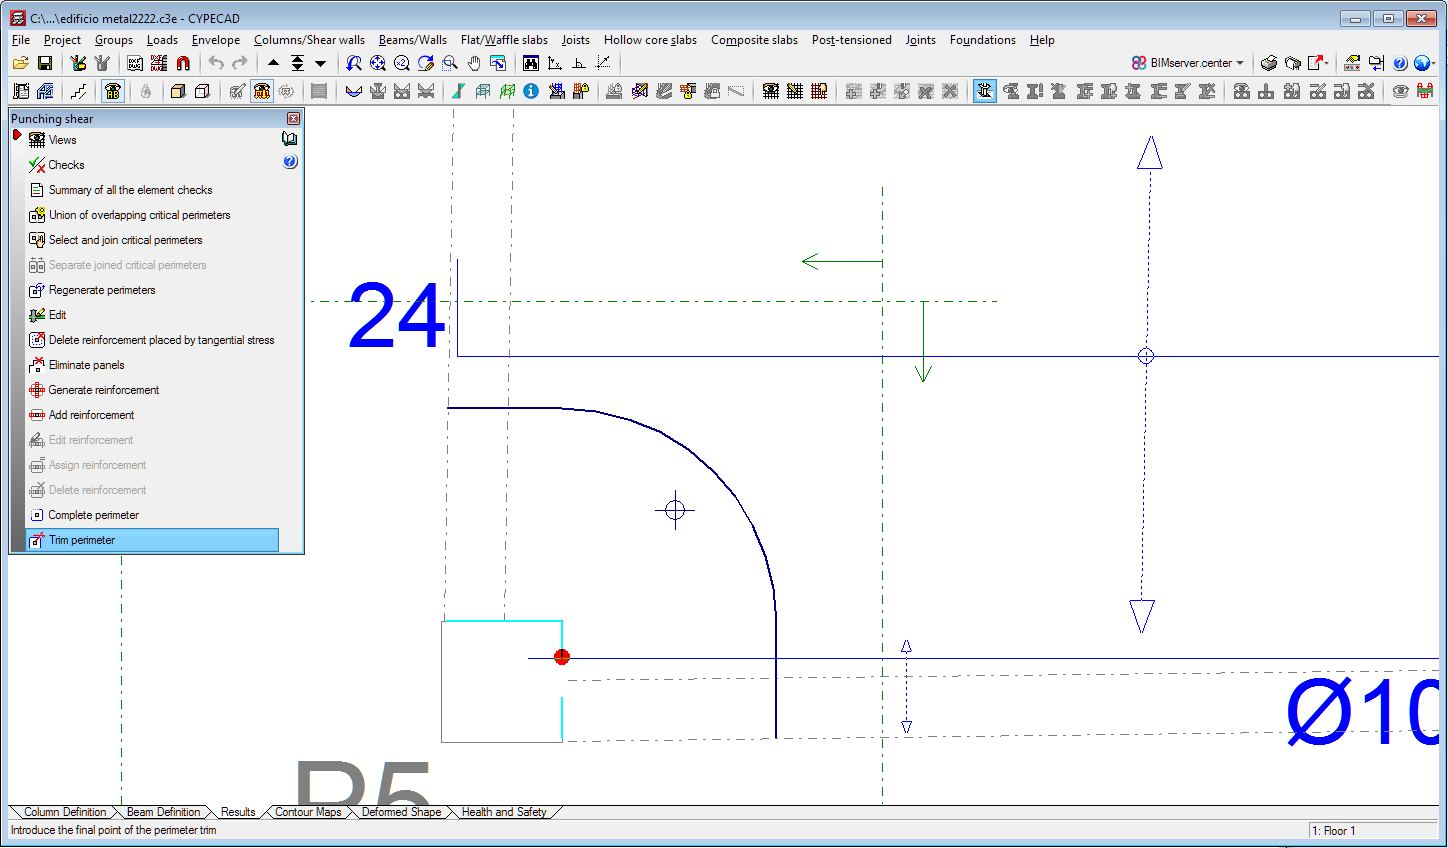 CYPECAD. Edit the perimeter of the support for punching shear check